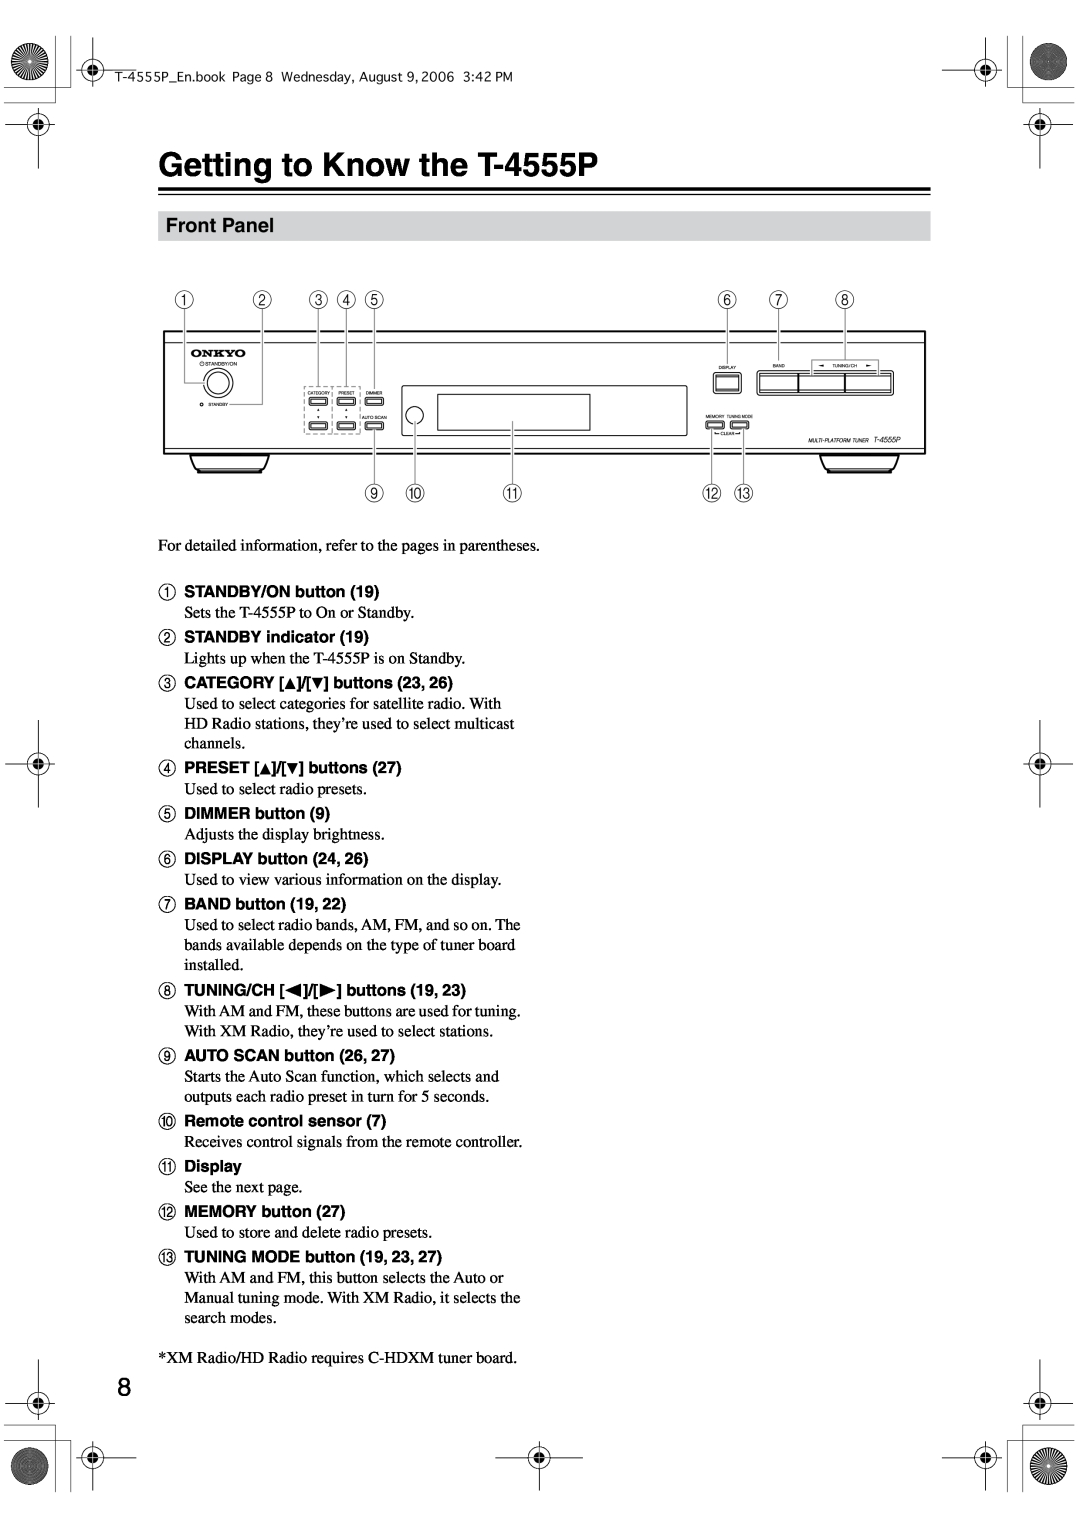 Onkyo instruction manual Getting to Know the T-4555P, Front Panel 